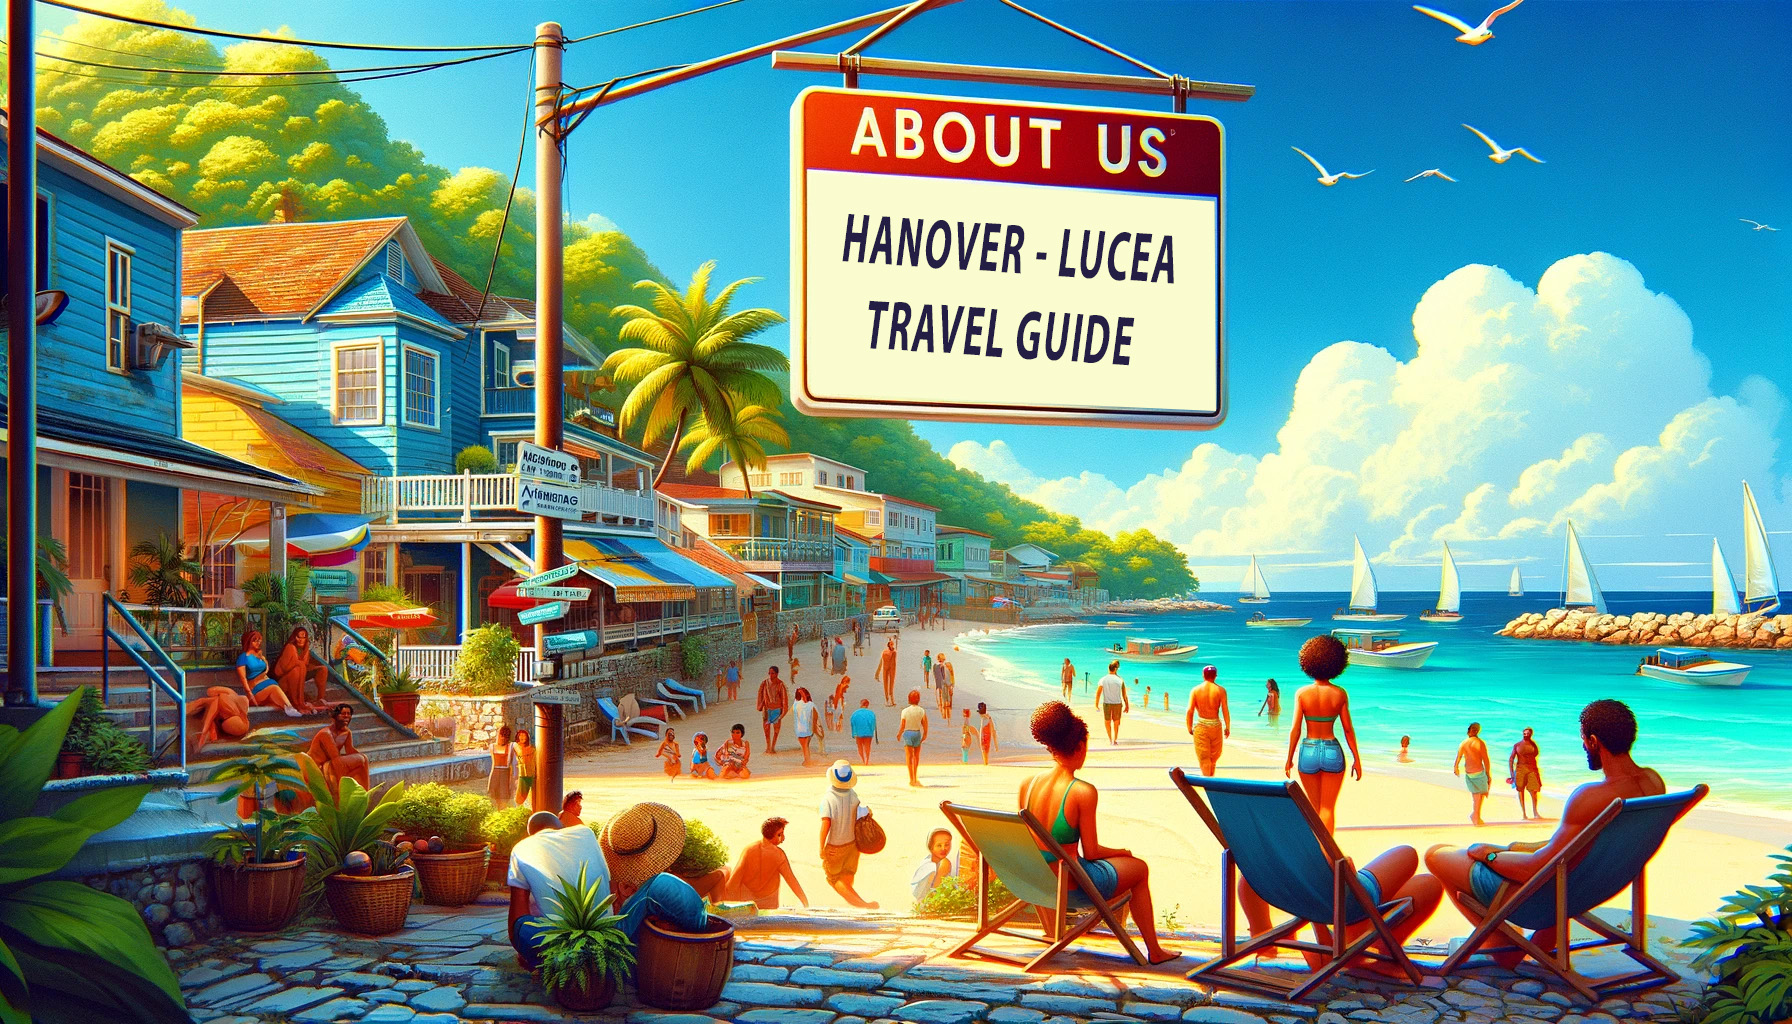 About Us - Hanover - Lucea Travel Guide